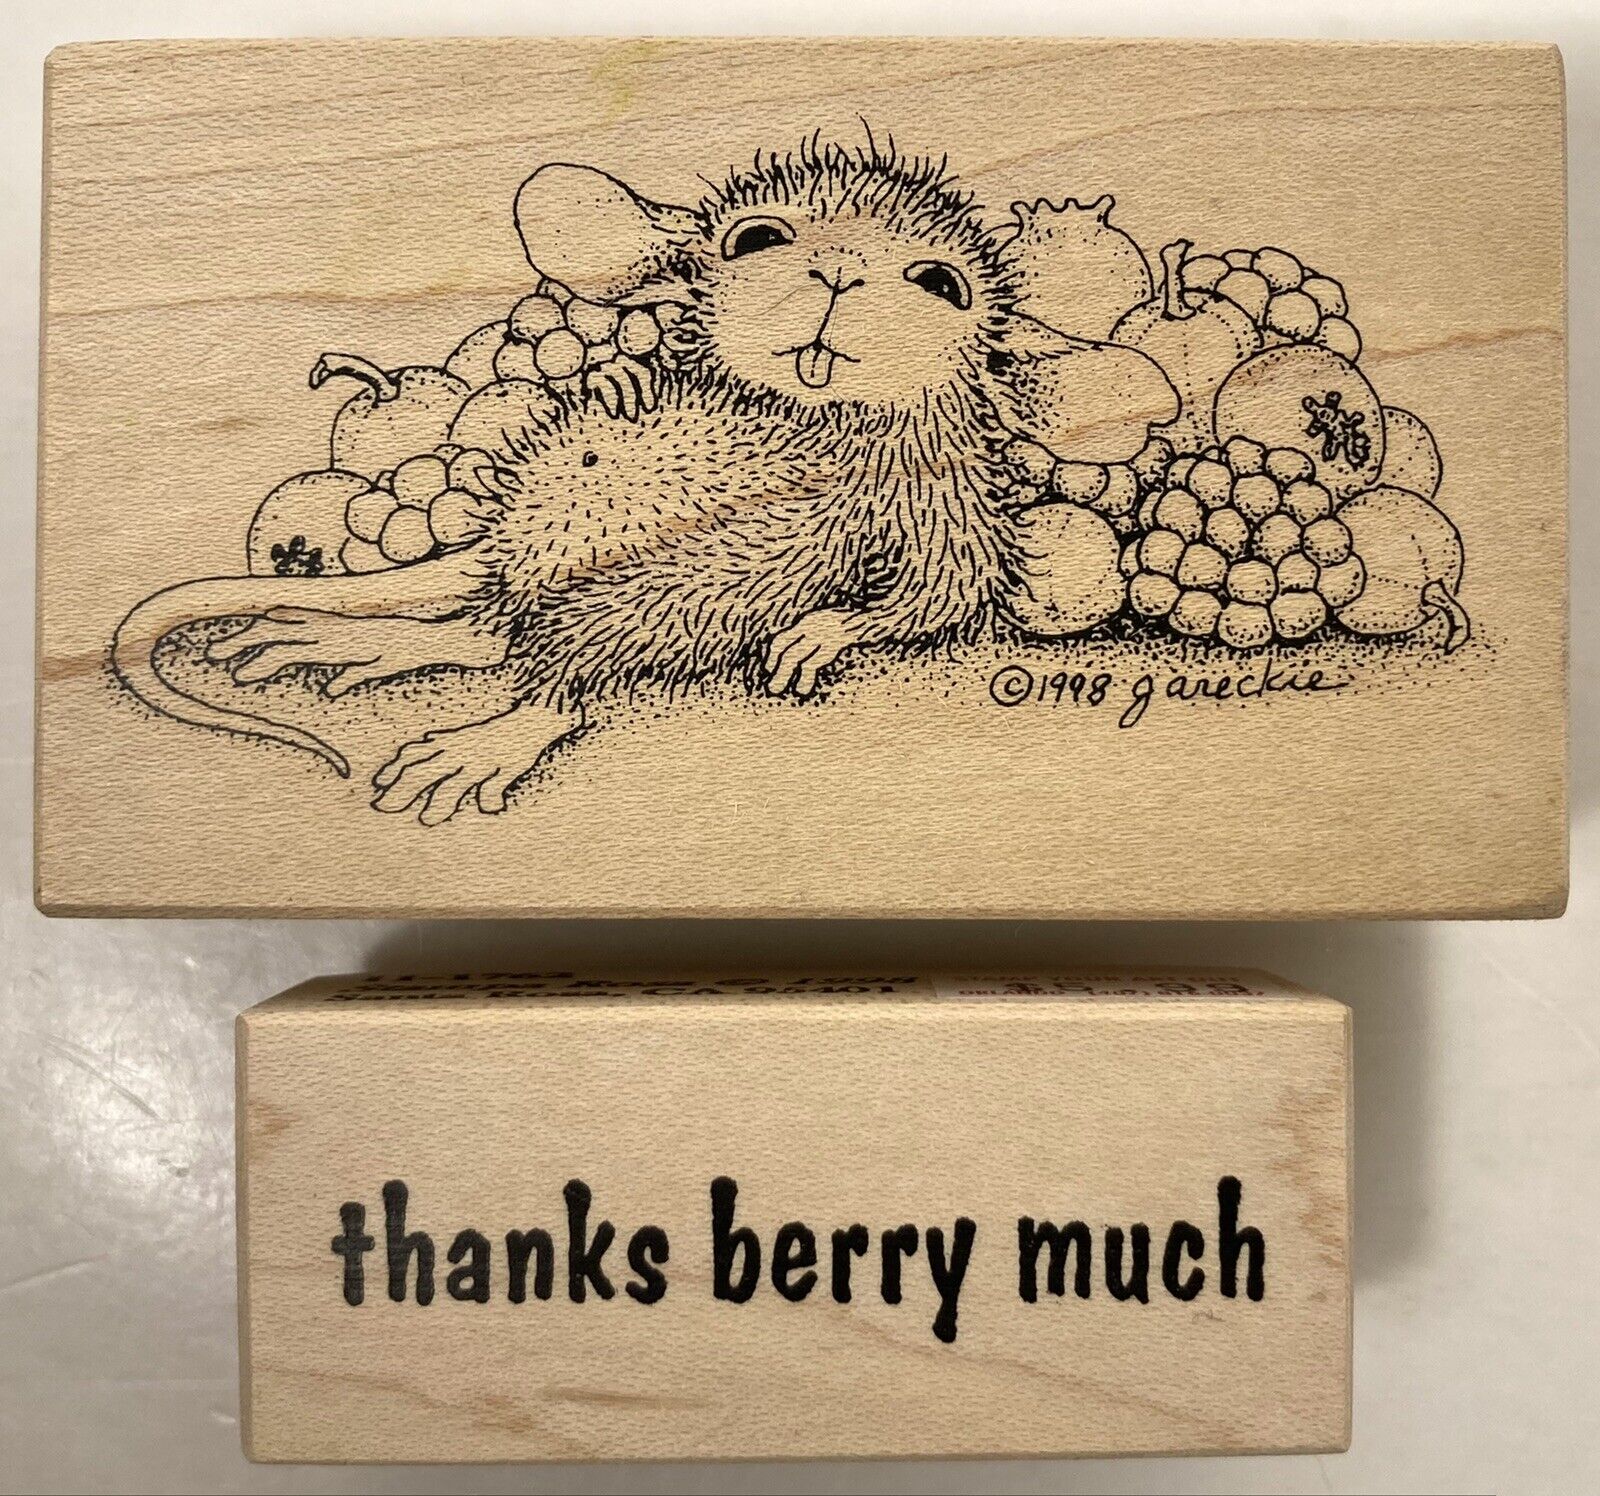 House Mouse BERRY FULL & THANKS BERRY MUCH Stampa Rosa Vintage Rubber Stamp Lot Stampa Rosa 503 F, 11-1762